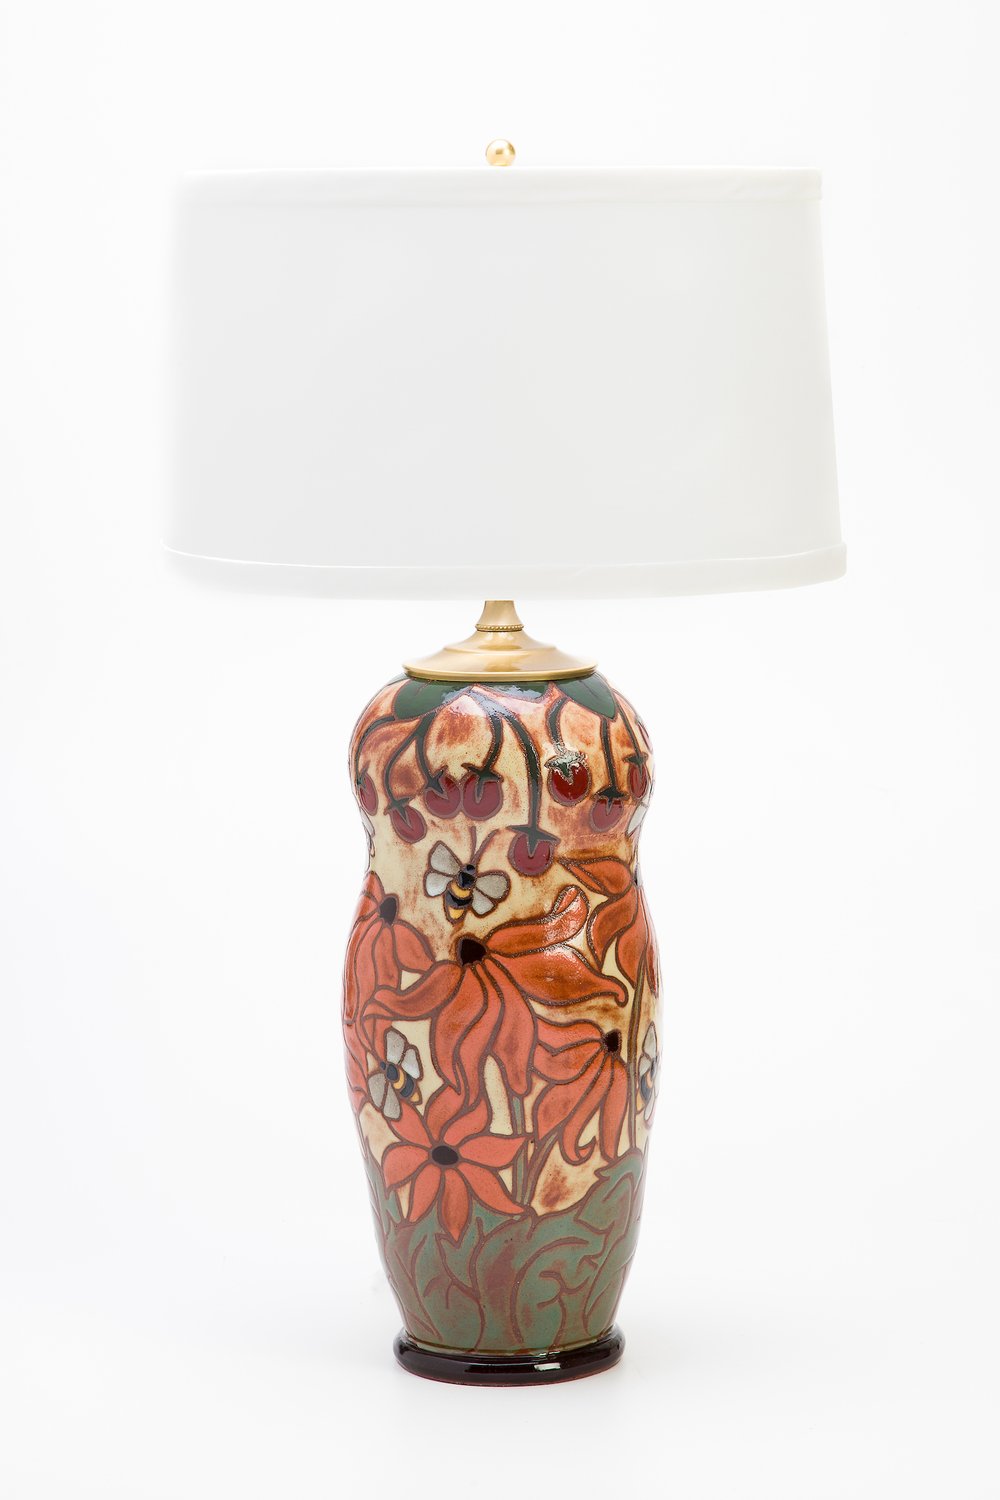 Sunny Table Lamp with Orange Cone Flowers, Bees, and Berries